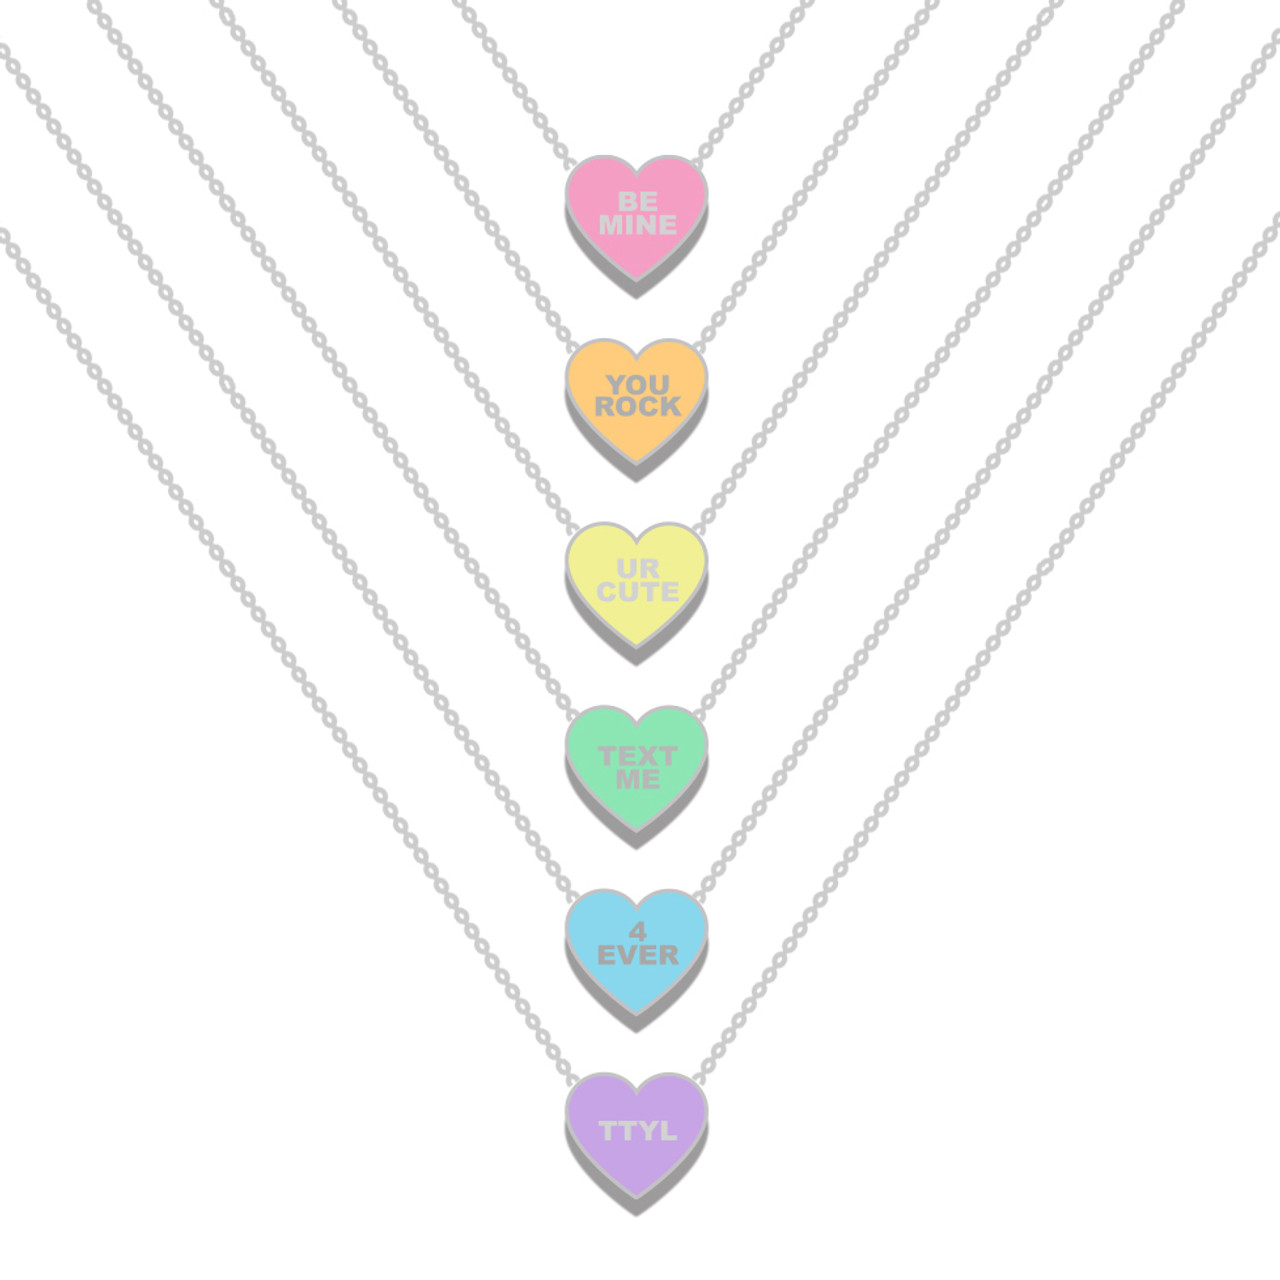 top trenz collection of heart shaped be mine conversation necklaces in packaging